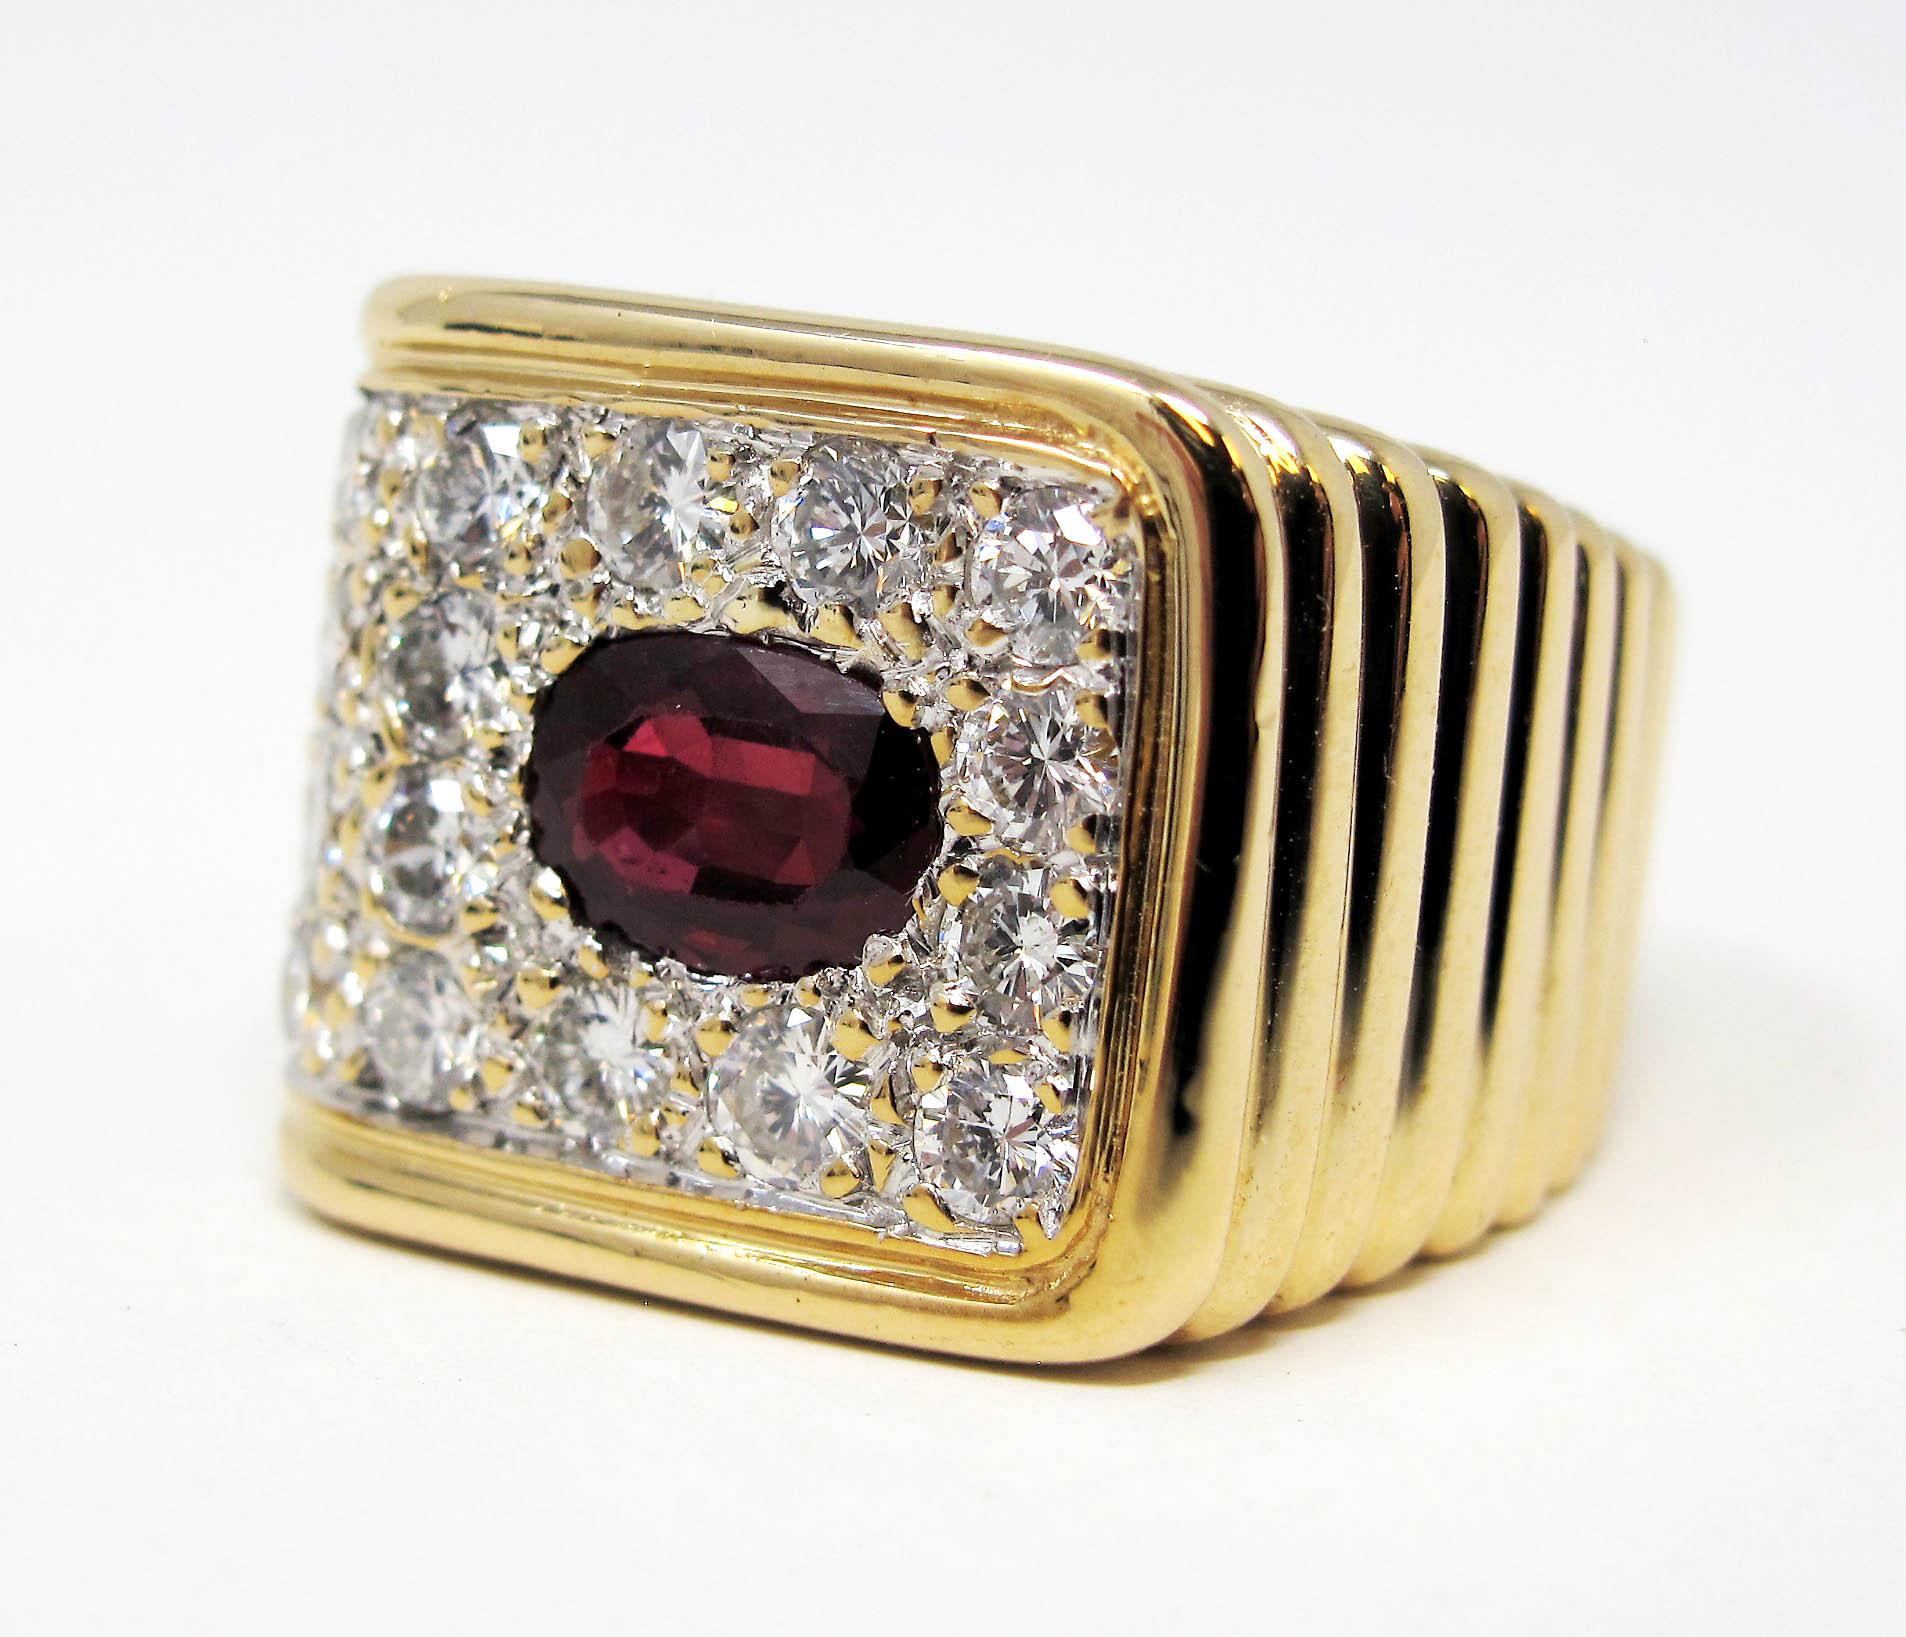 This bold, beautiful diamond and ruby band ring is absolutely bursting with sparkle! Featuring a stunning oval shaped red ruby stone and multiple rows of glittering pave diamonds, this contemporary square shaped ring really fills the finger with